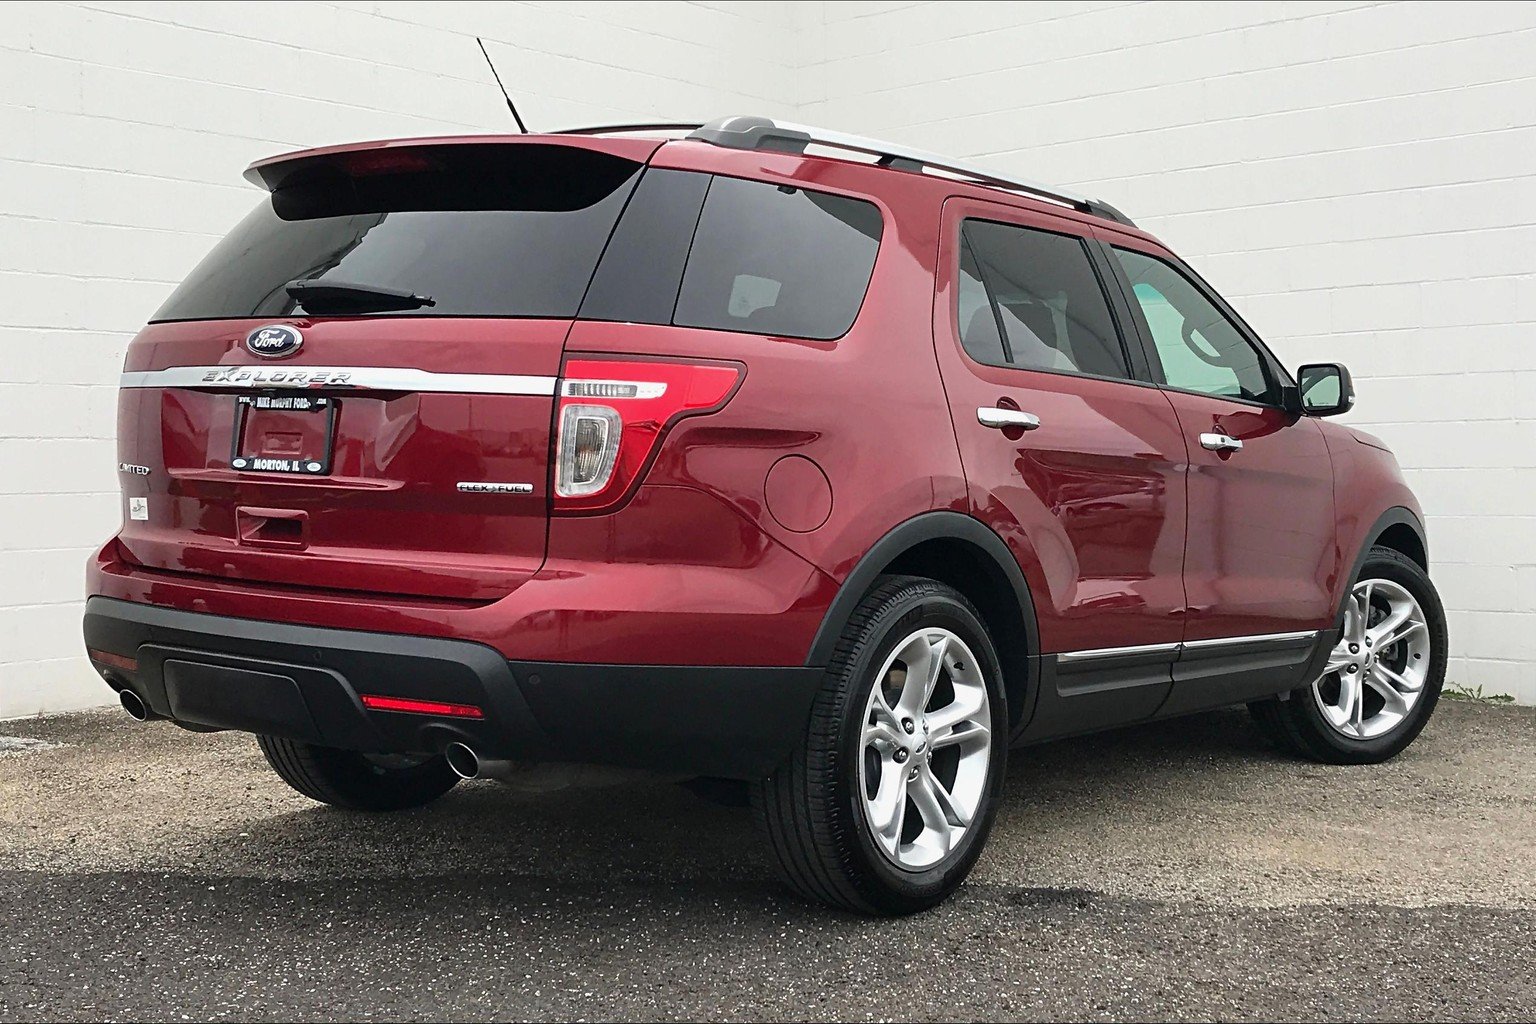 Pre-Owned 2015 Ford Explorer FWD 4dr Limited Sport Utility in Morton #